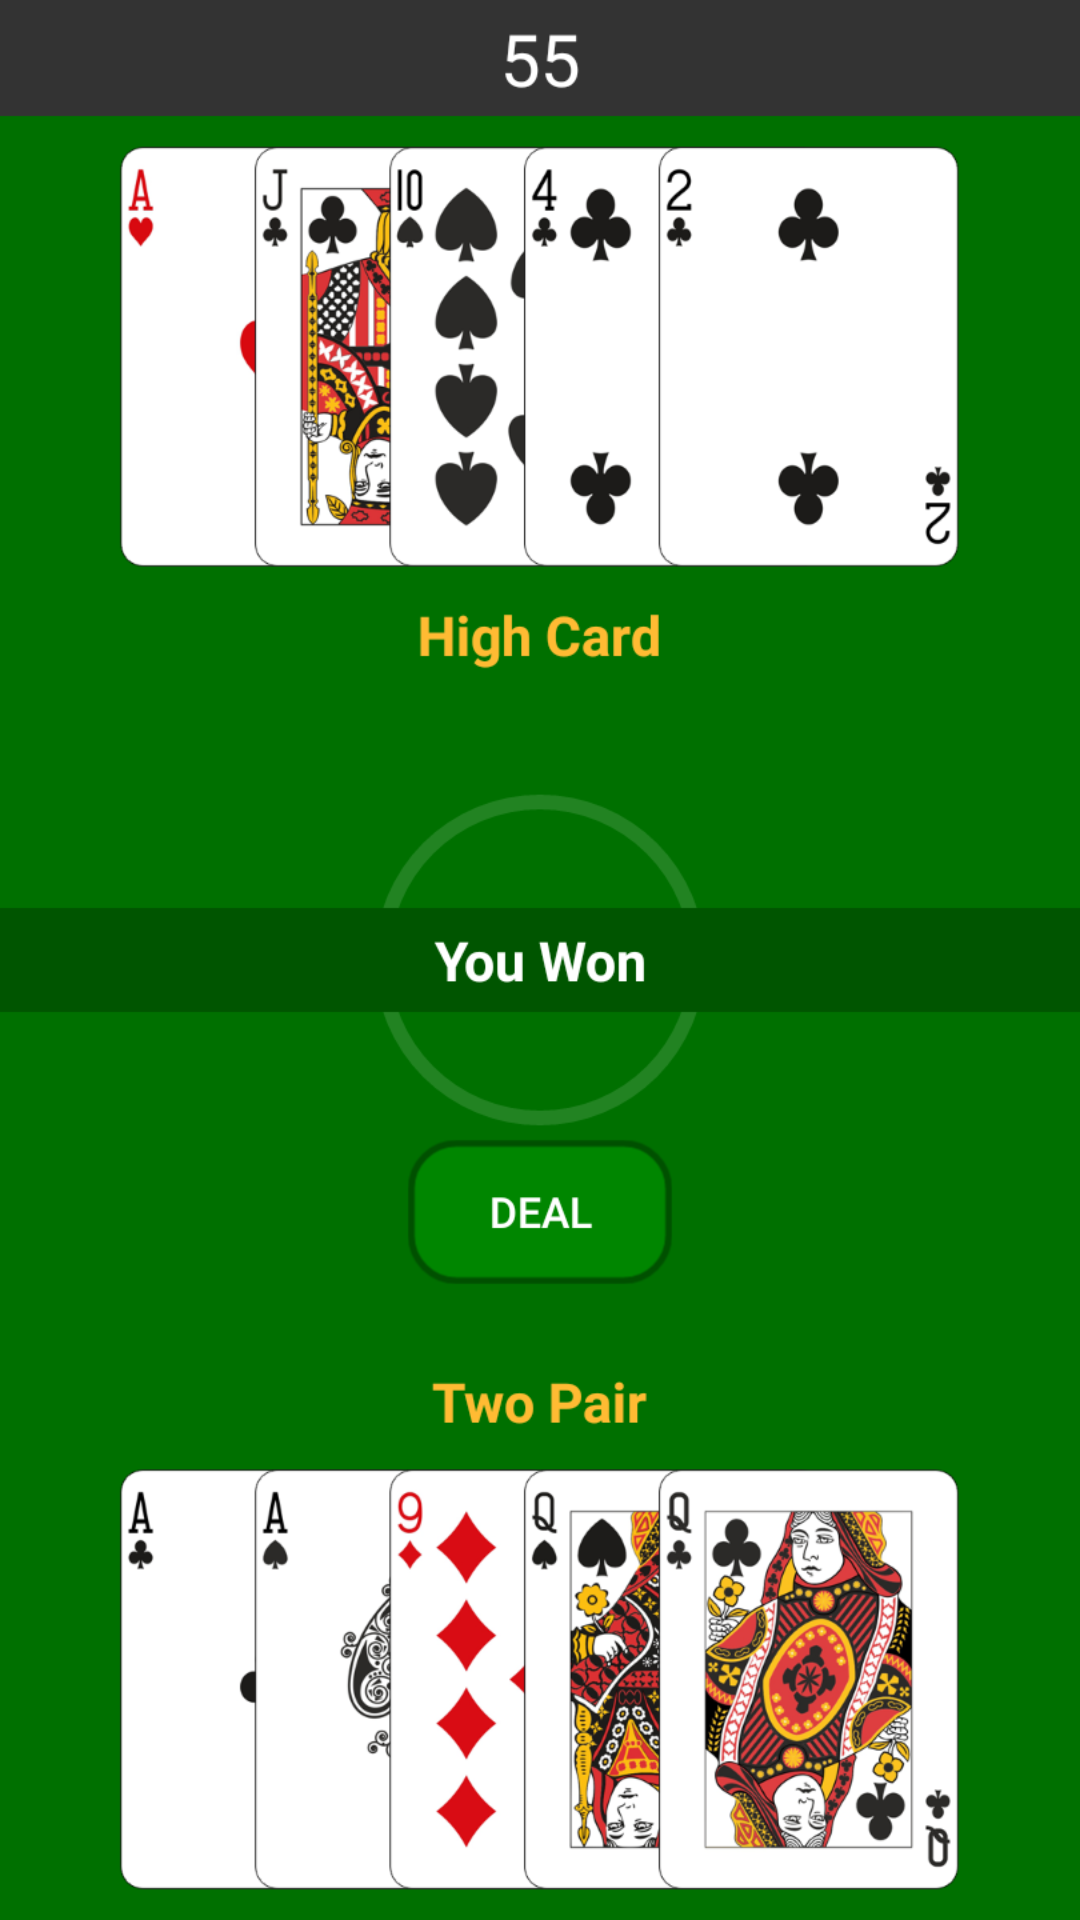 Android application Simple Poker screenshort